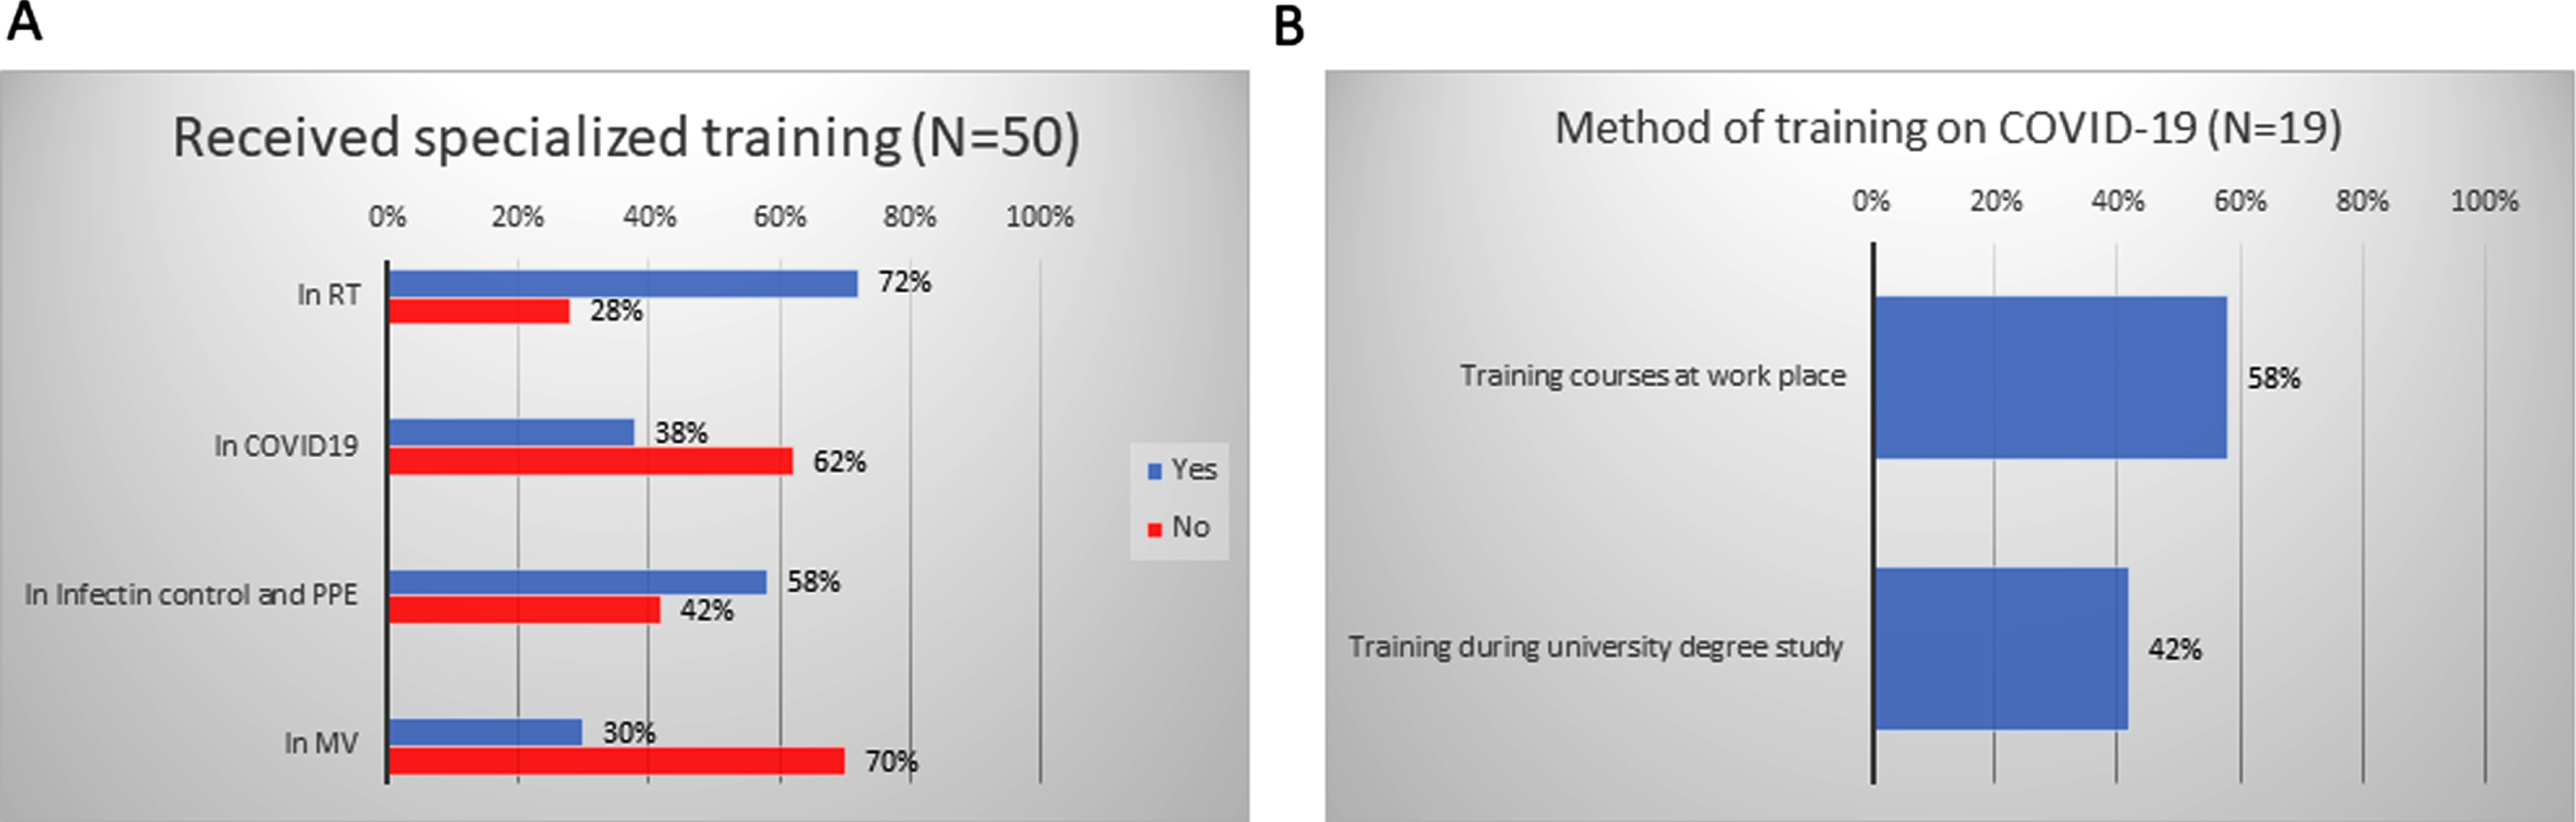 The percentage of participants who received specialized training (A), and the method by which training on COVID-19 management was provided (B).